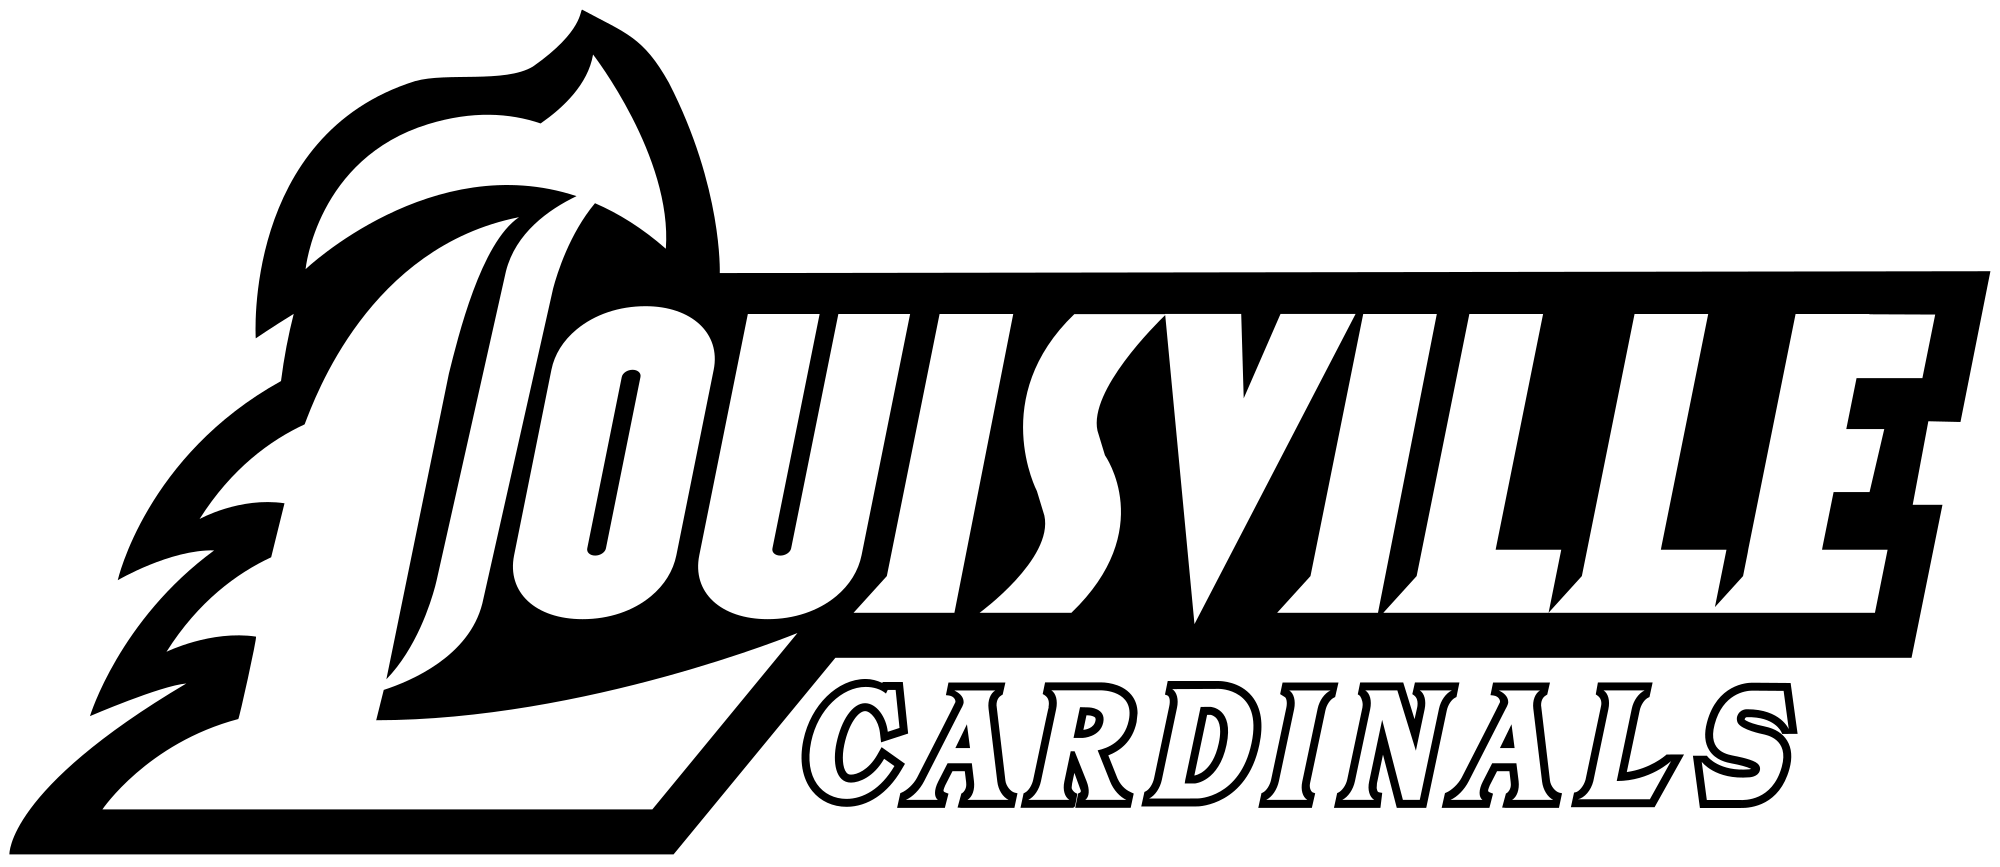 Louisville Cards Logo - File:Louisville Cardinals text logo.svg - Wikimedia Commons